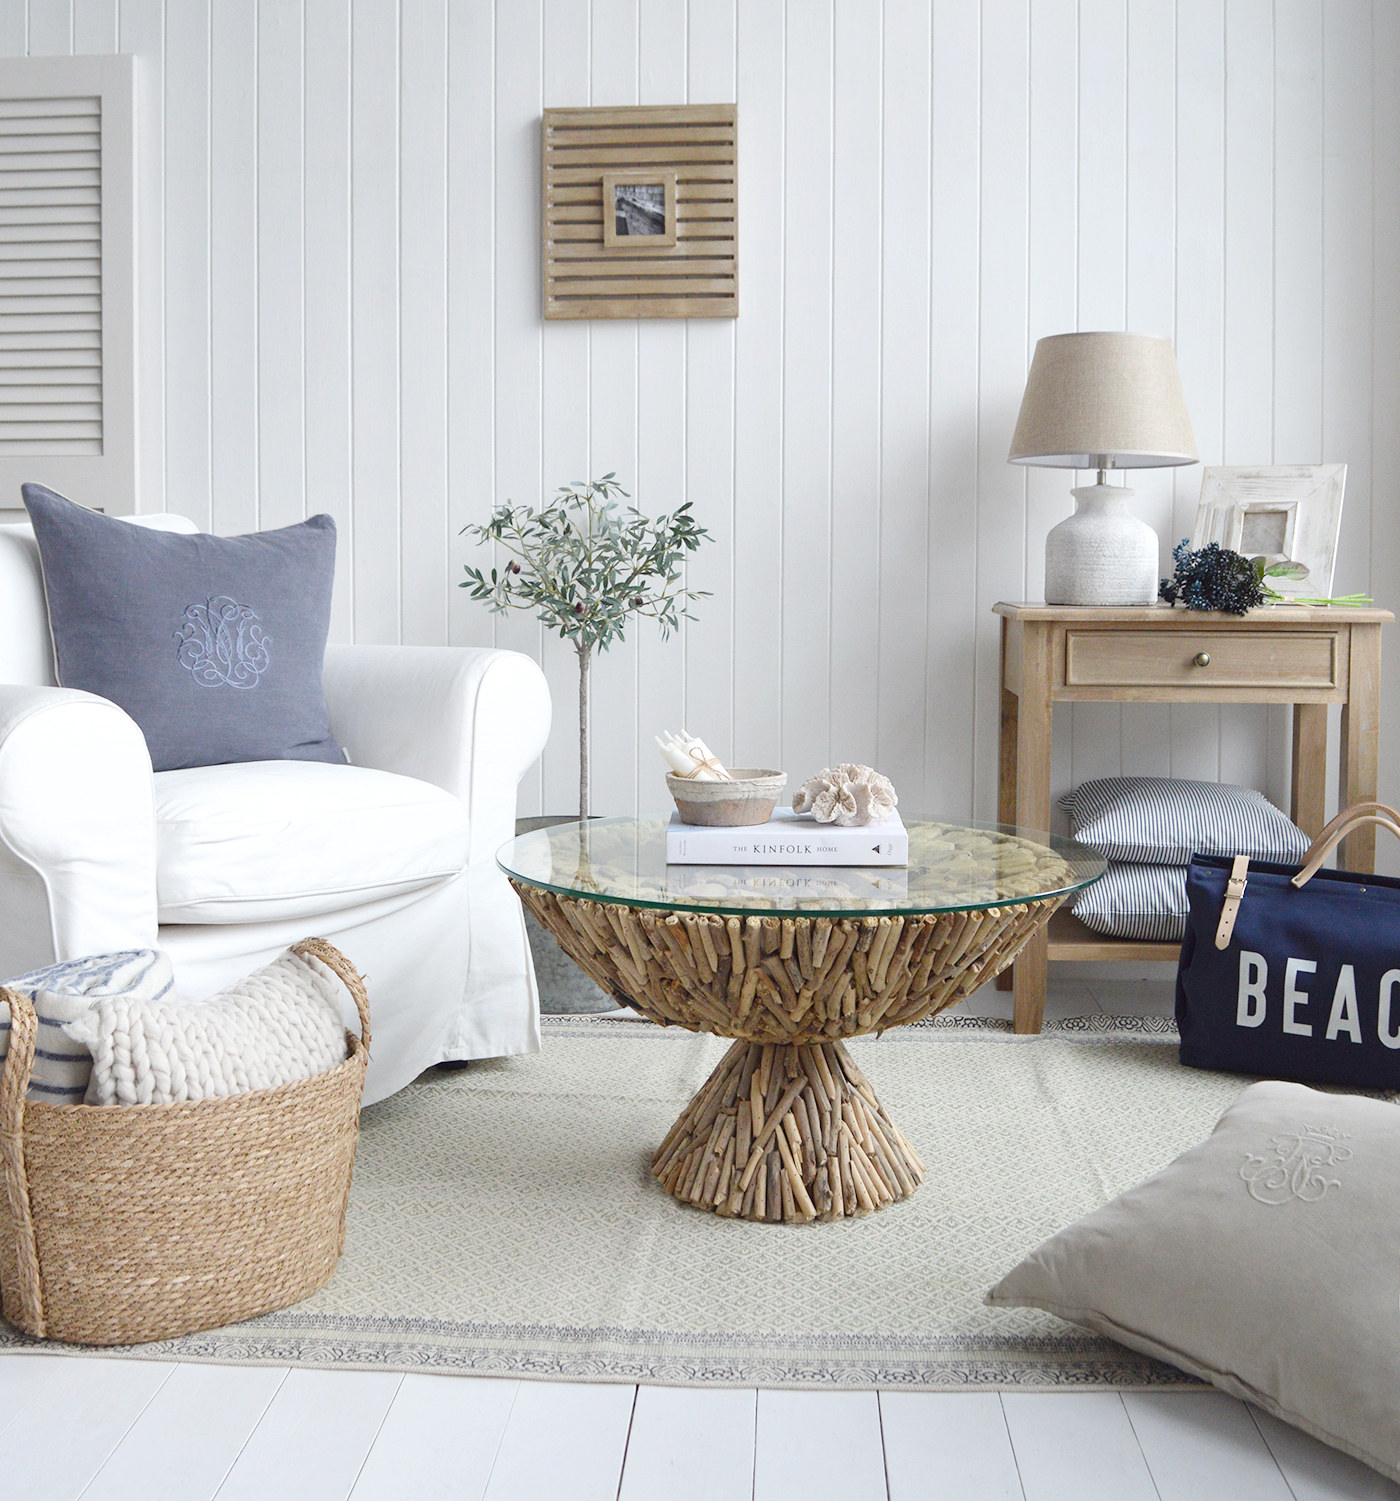 Driftwood coffee table for coastal living room furniture in natural textures